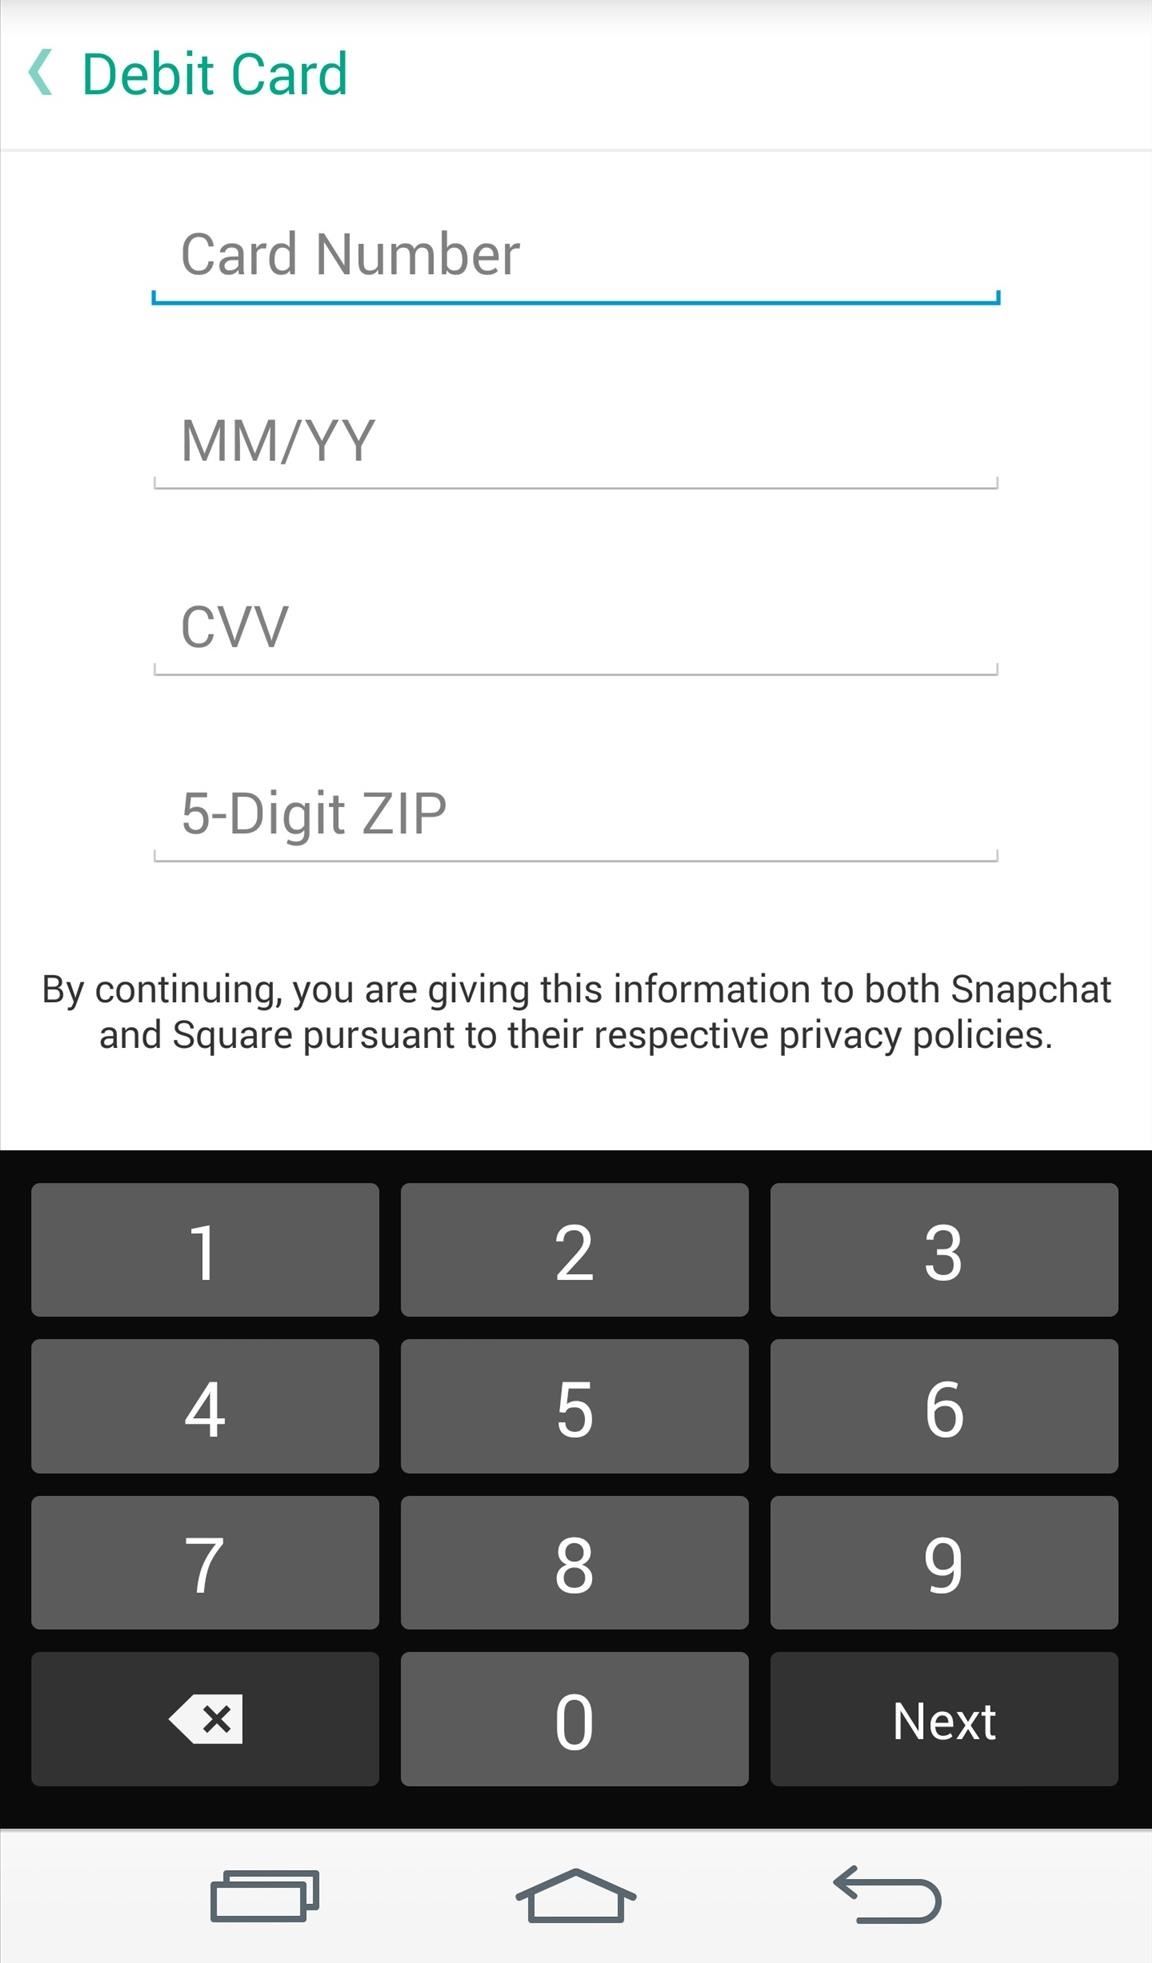 Snapcash: Send Money to Friends Directly in Snapchat